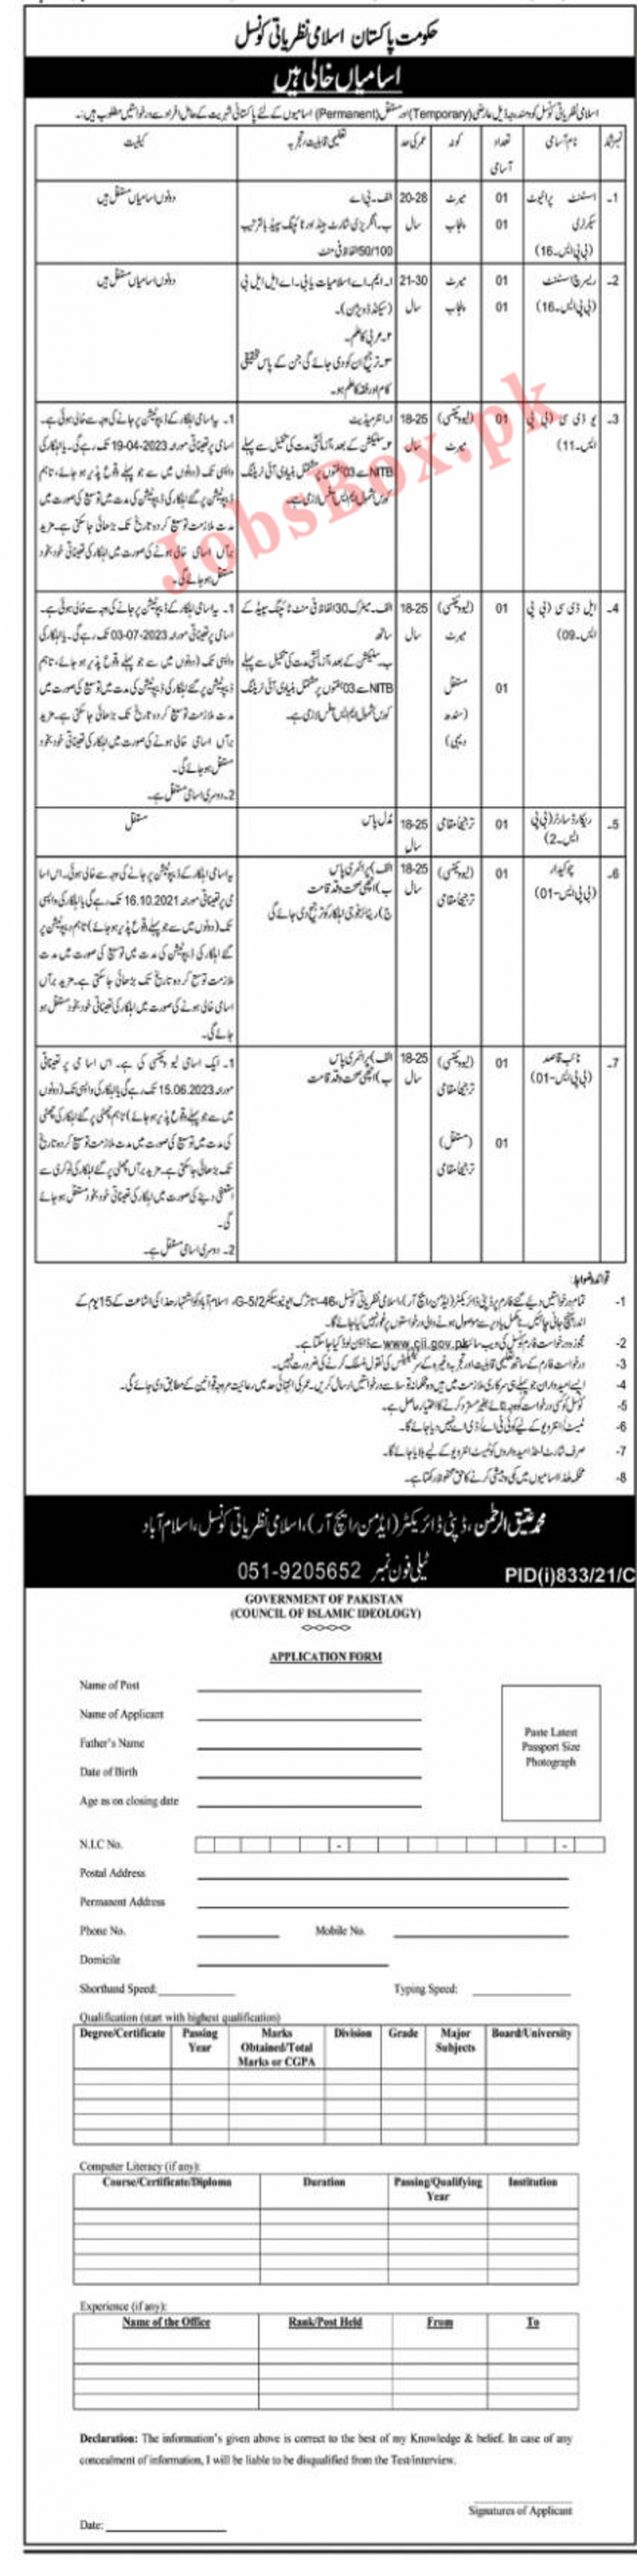 Council of Islamic Ideology Jobs 2021 - Download Application Form www.cii.gov.pk